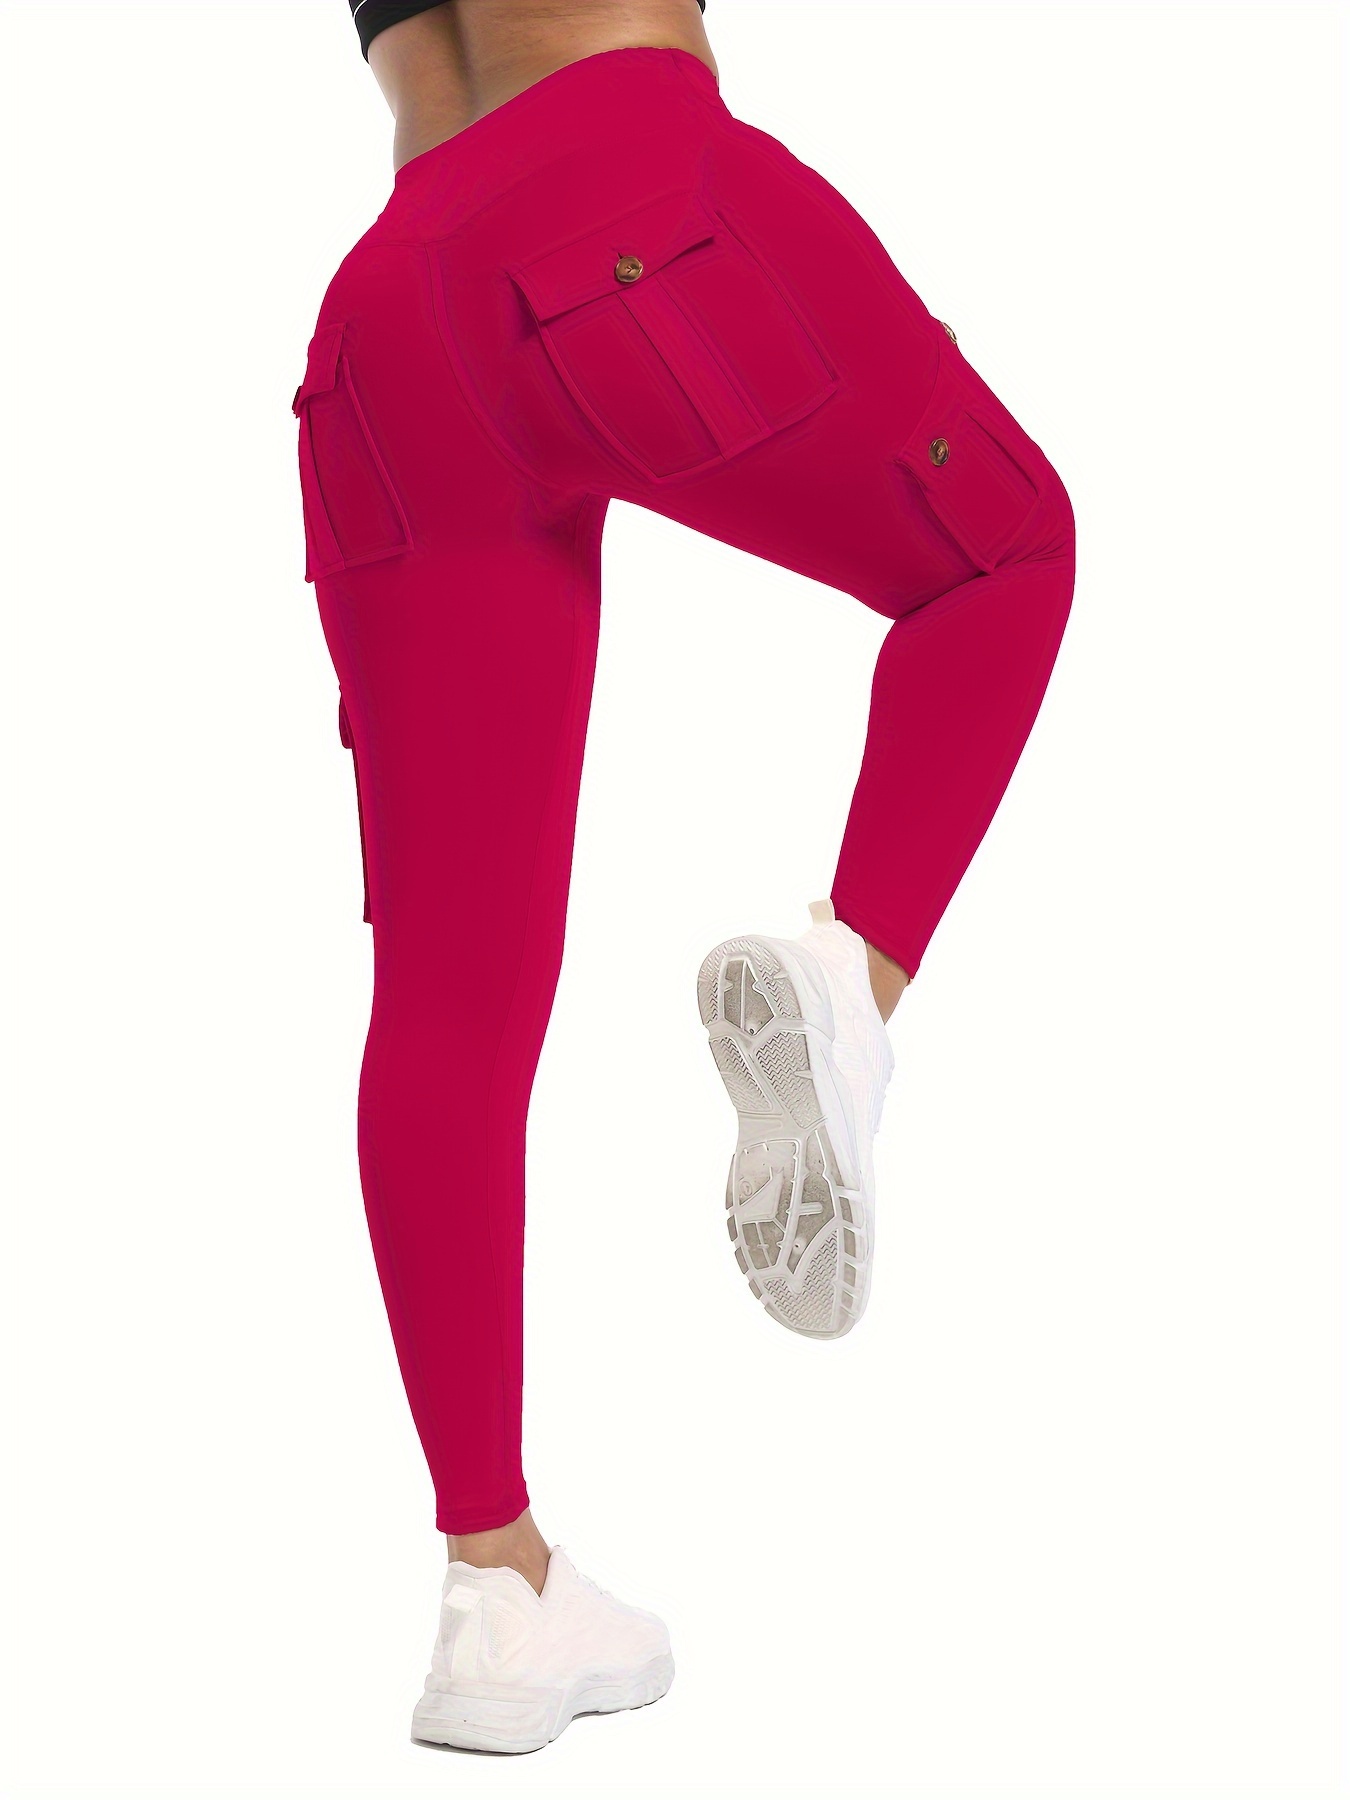 Yageshark High Waisted Leggings for Women with Pockets Tummy